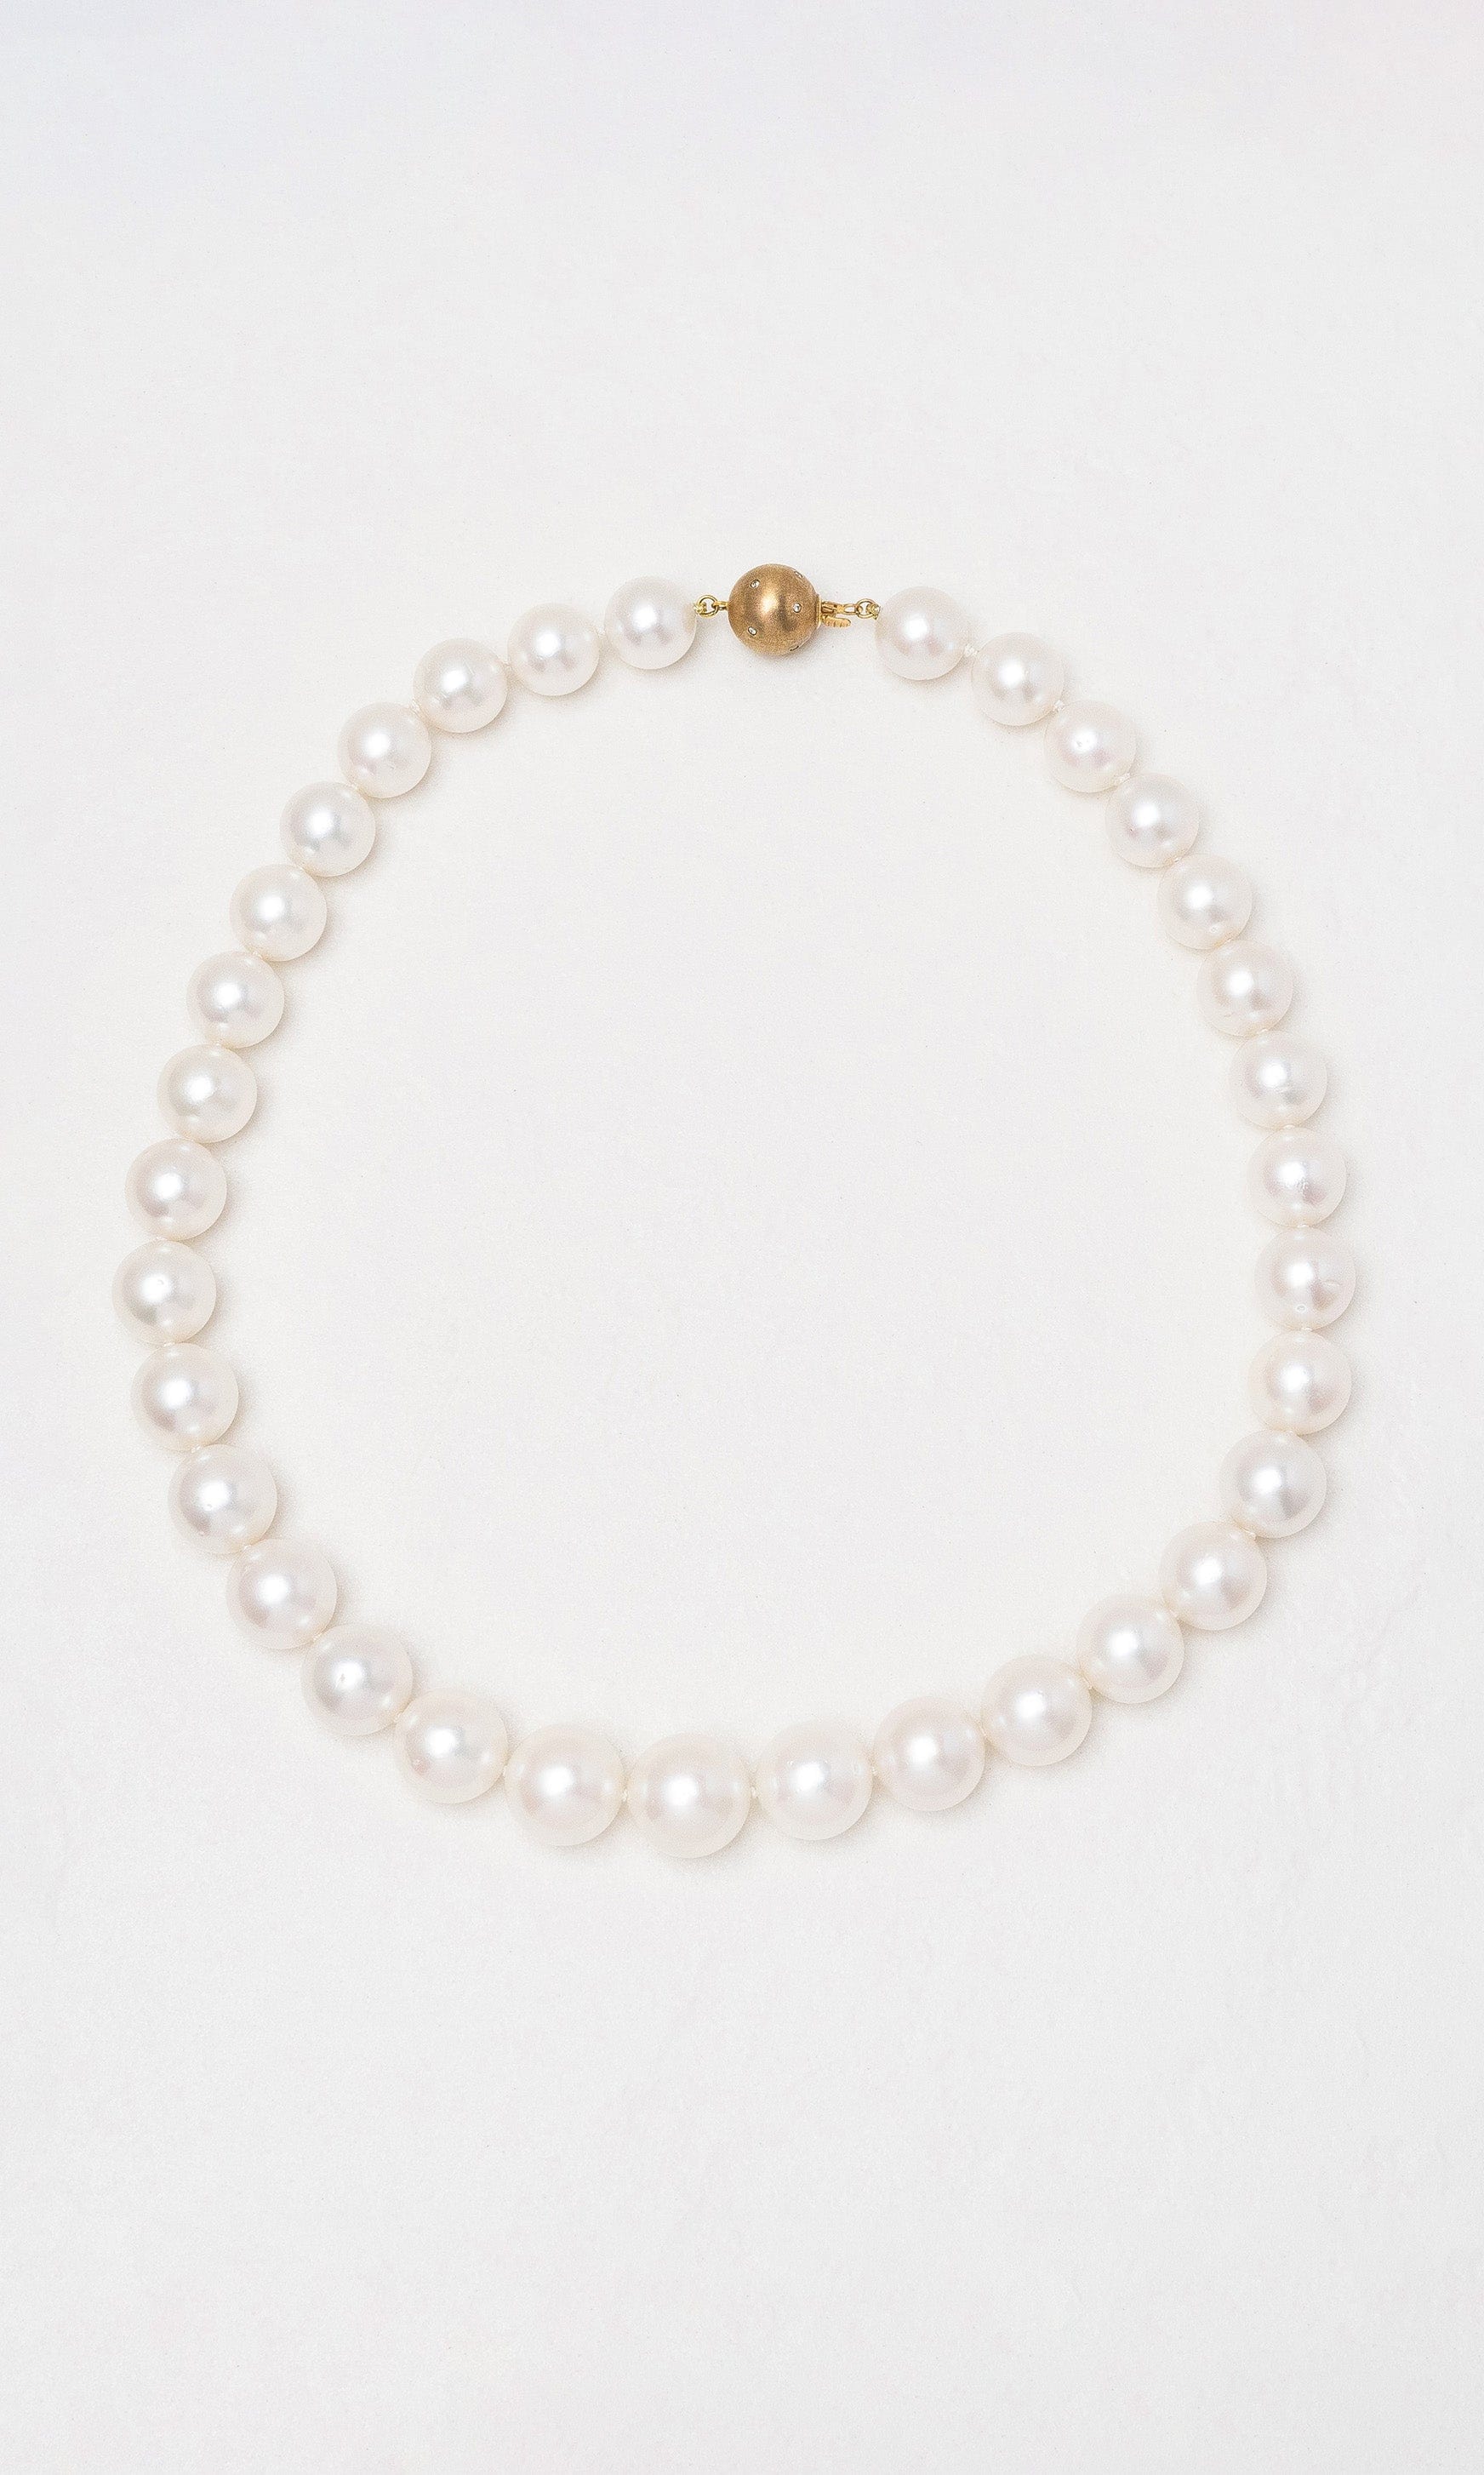 Hogans Family Jewellers 9K YG South Sea Pearl Necklace